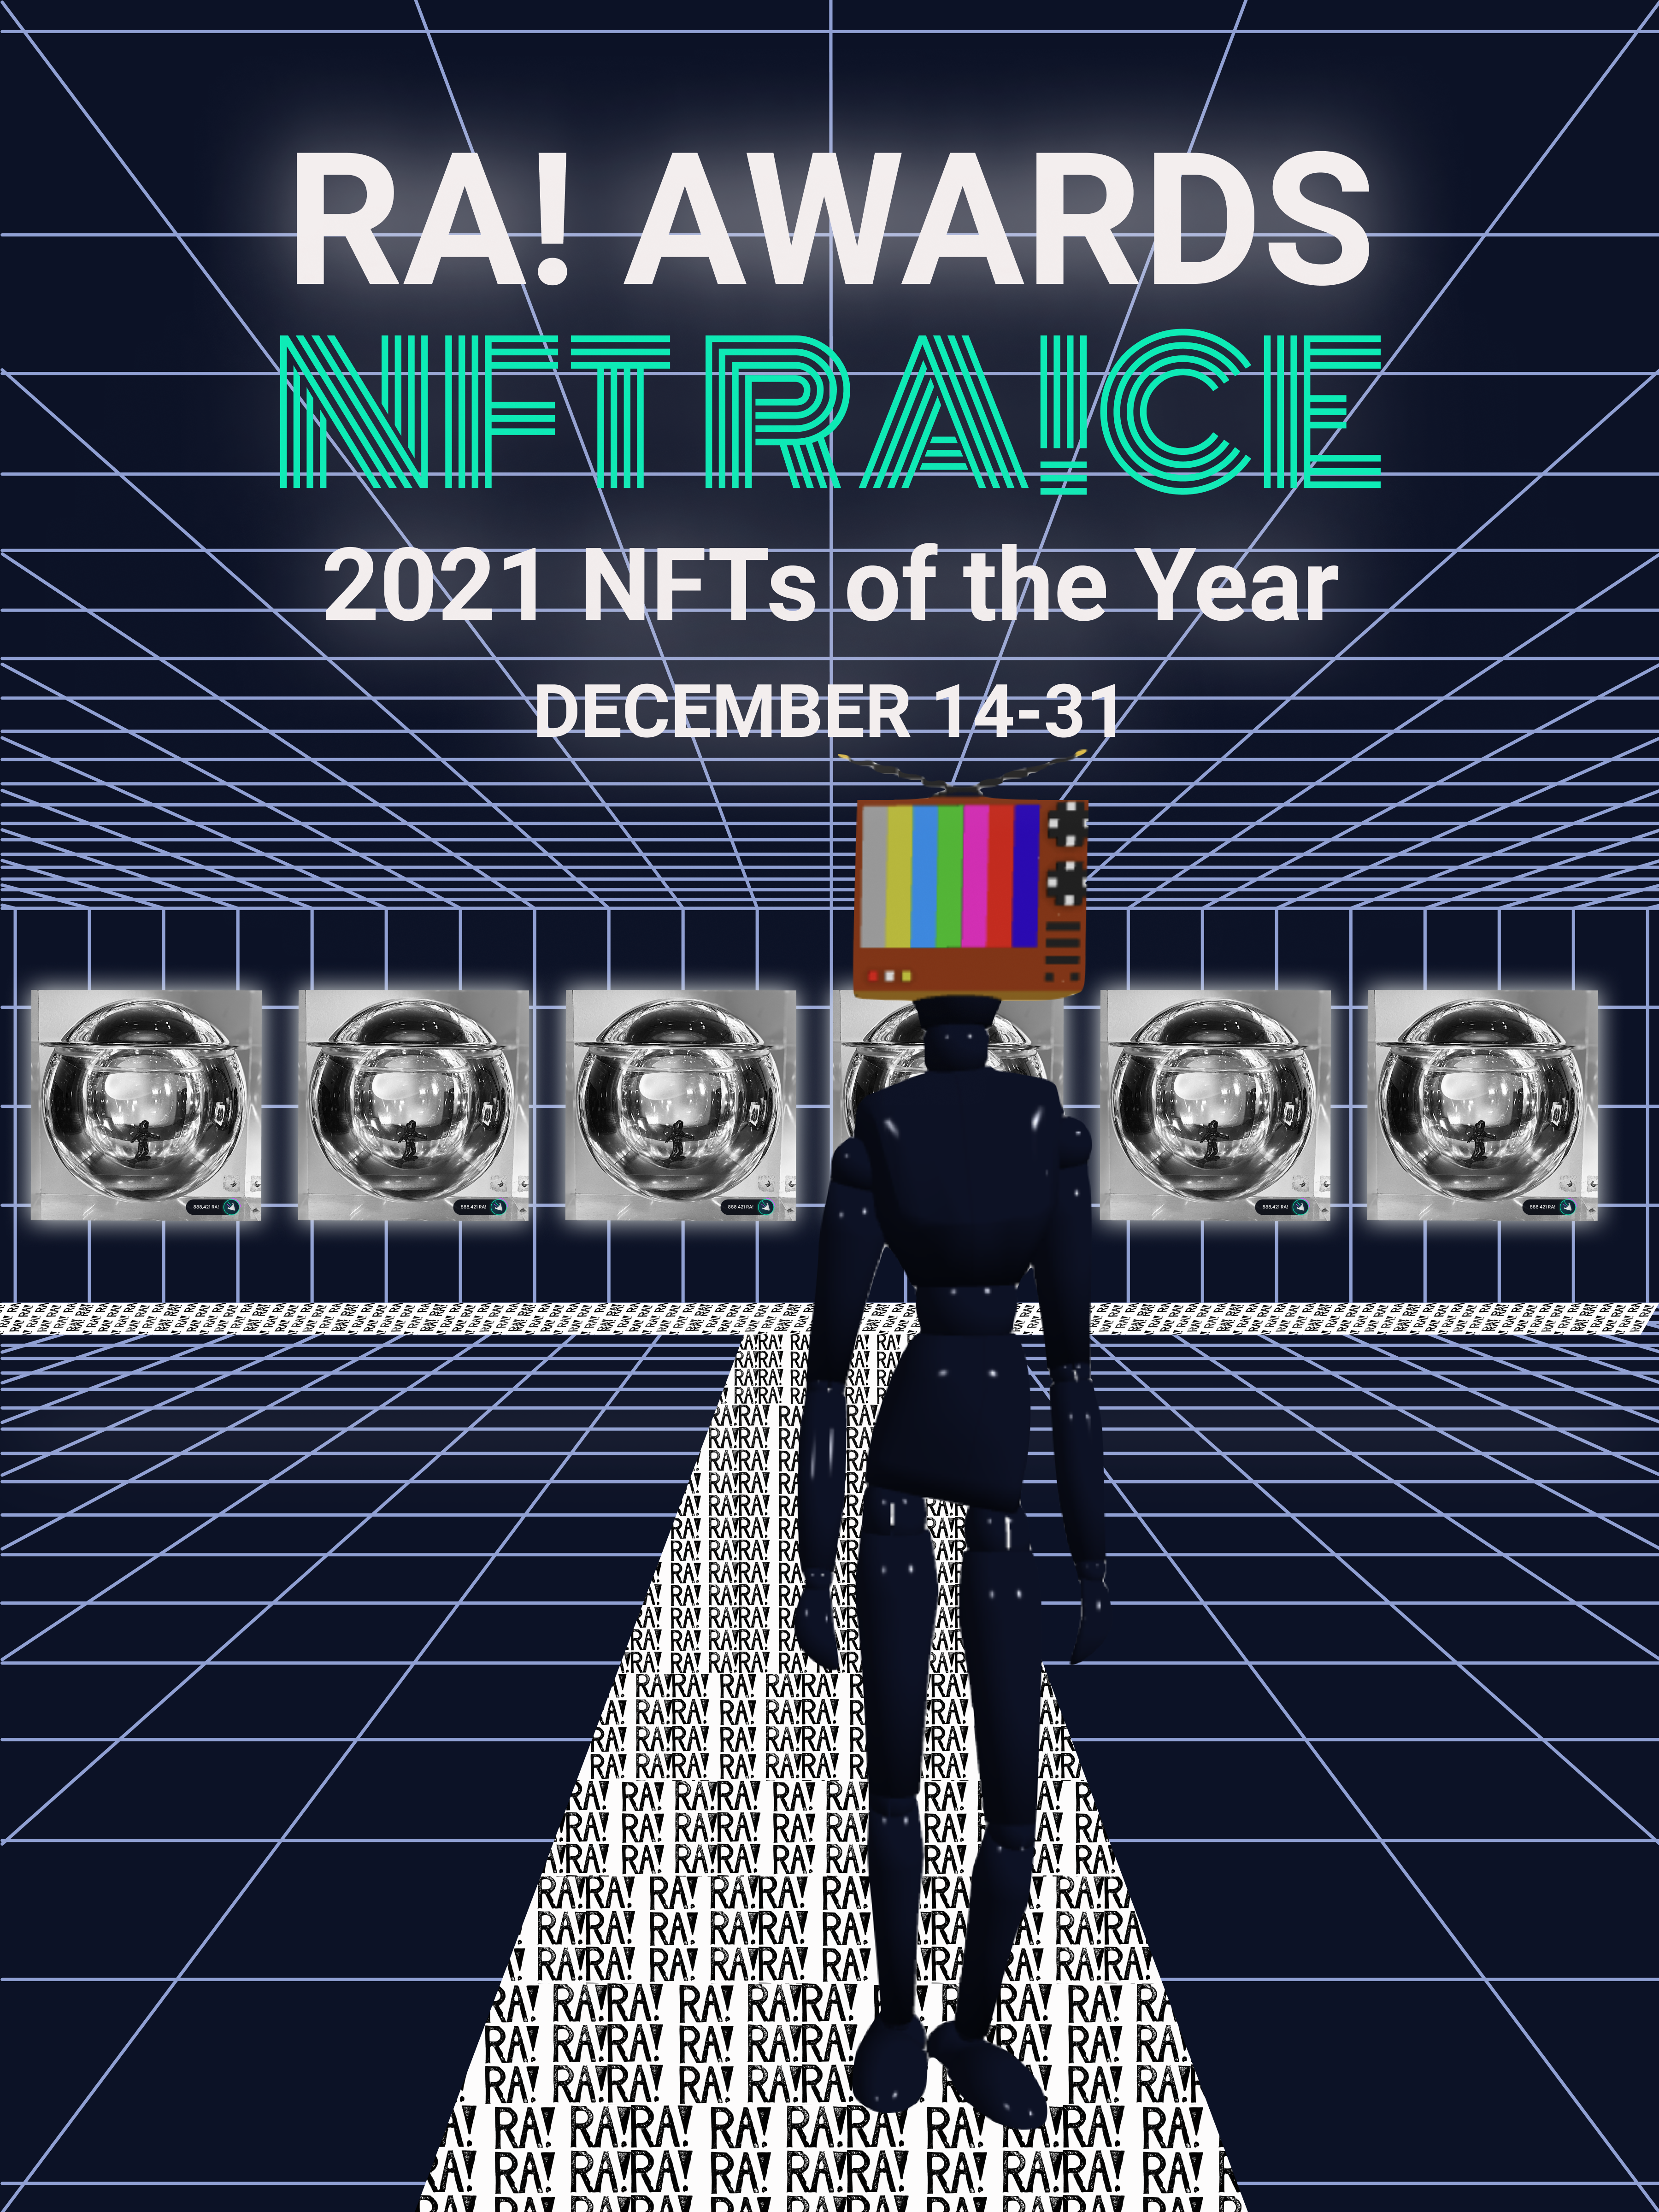 Created by @lwsnbaker, founder of RARA, this piece represents the future of NFTs and social life on the Internet. As NFTs win RA!CEs, the RA!CE Galleries in NFT metaverses will be filled with the best NFTs according to fans. Here the metaverses go three layers deep. The avatar is a picture of @lwsnbaker's Cryptovoxel avatar with a TV screen on his head with the "Please Stand By" screen of the 1990's, an ode to how we previously consumed rather than experienced art. Behind him is a metaverse gallery of the future featuring 6 artworks alluding to the RA! Award Exhibits. Each artwork includes a $RA! count from fans and a B&W photo of acrylic cube. This cube represents the third layer of metaverse where a moon man on a skateboard (😉 MTV) is experiencing something fresh, life in the metaverse. His signature? IYKYK.